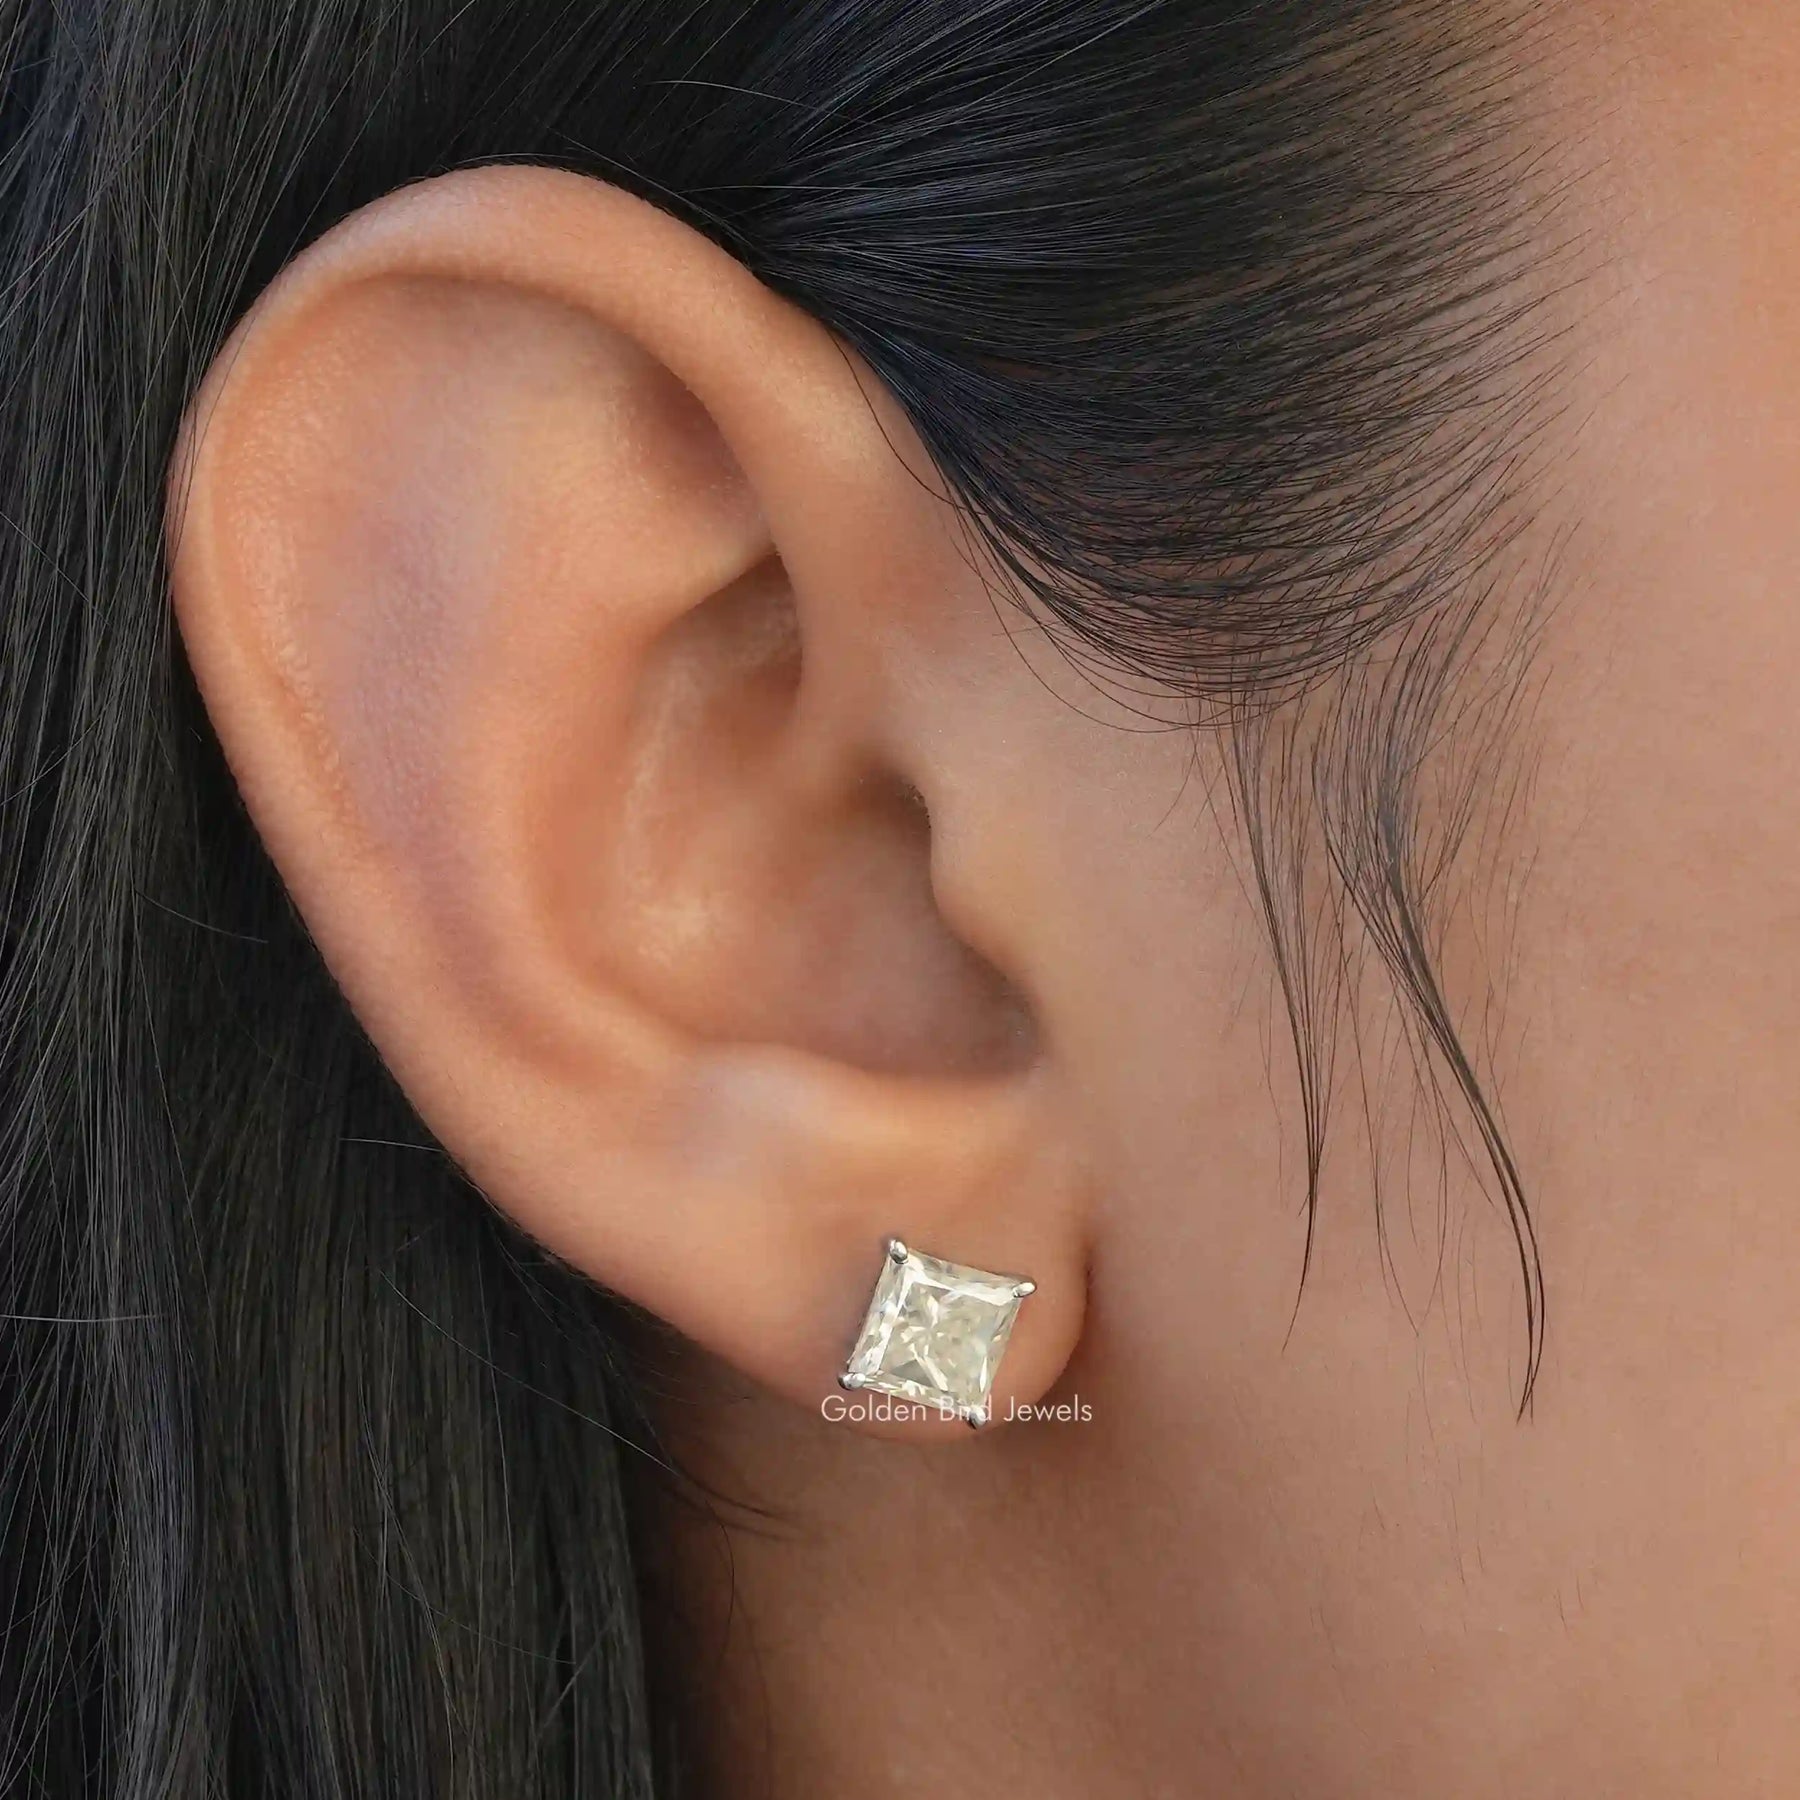 [In ear front view of princess cut stud earrings made of white gold]-[Golden Bird Jewels]